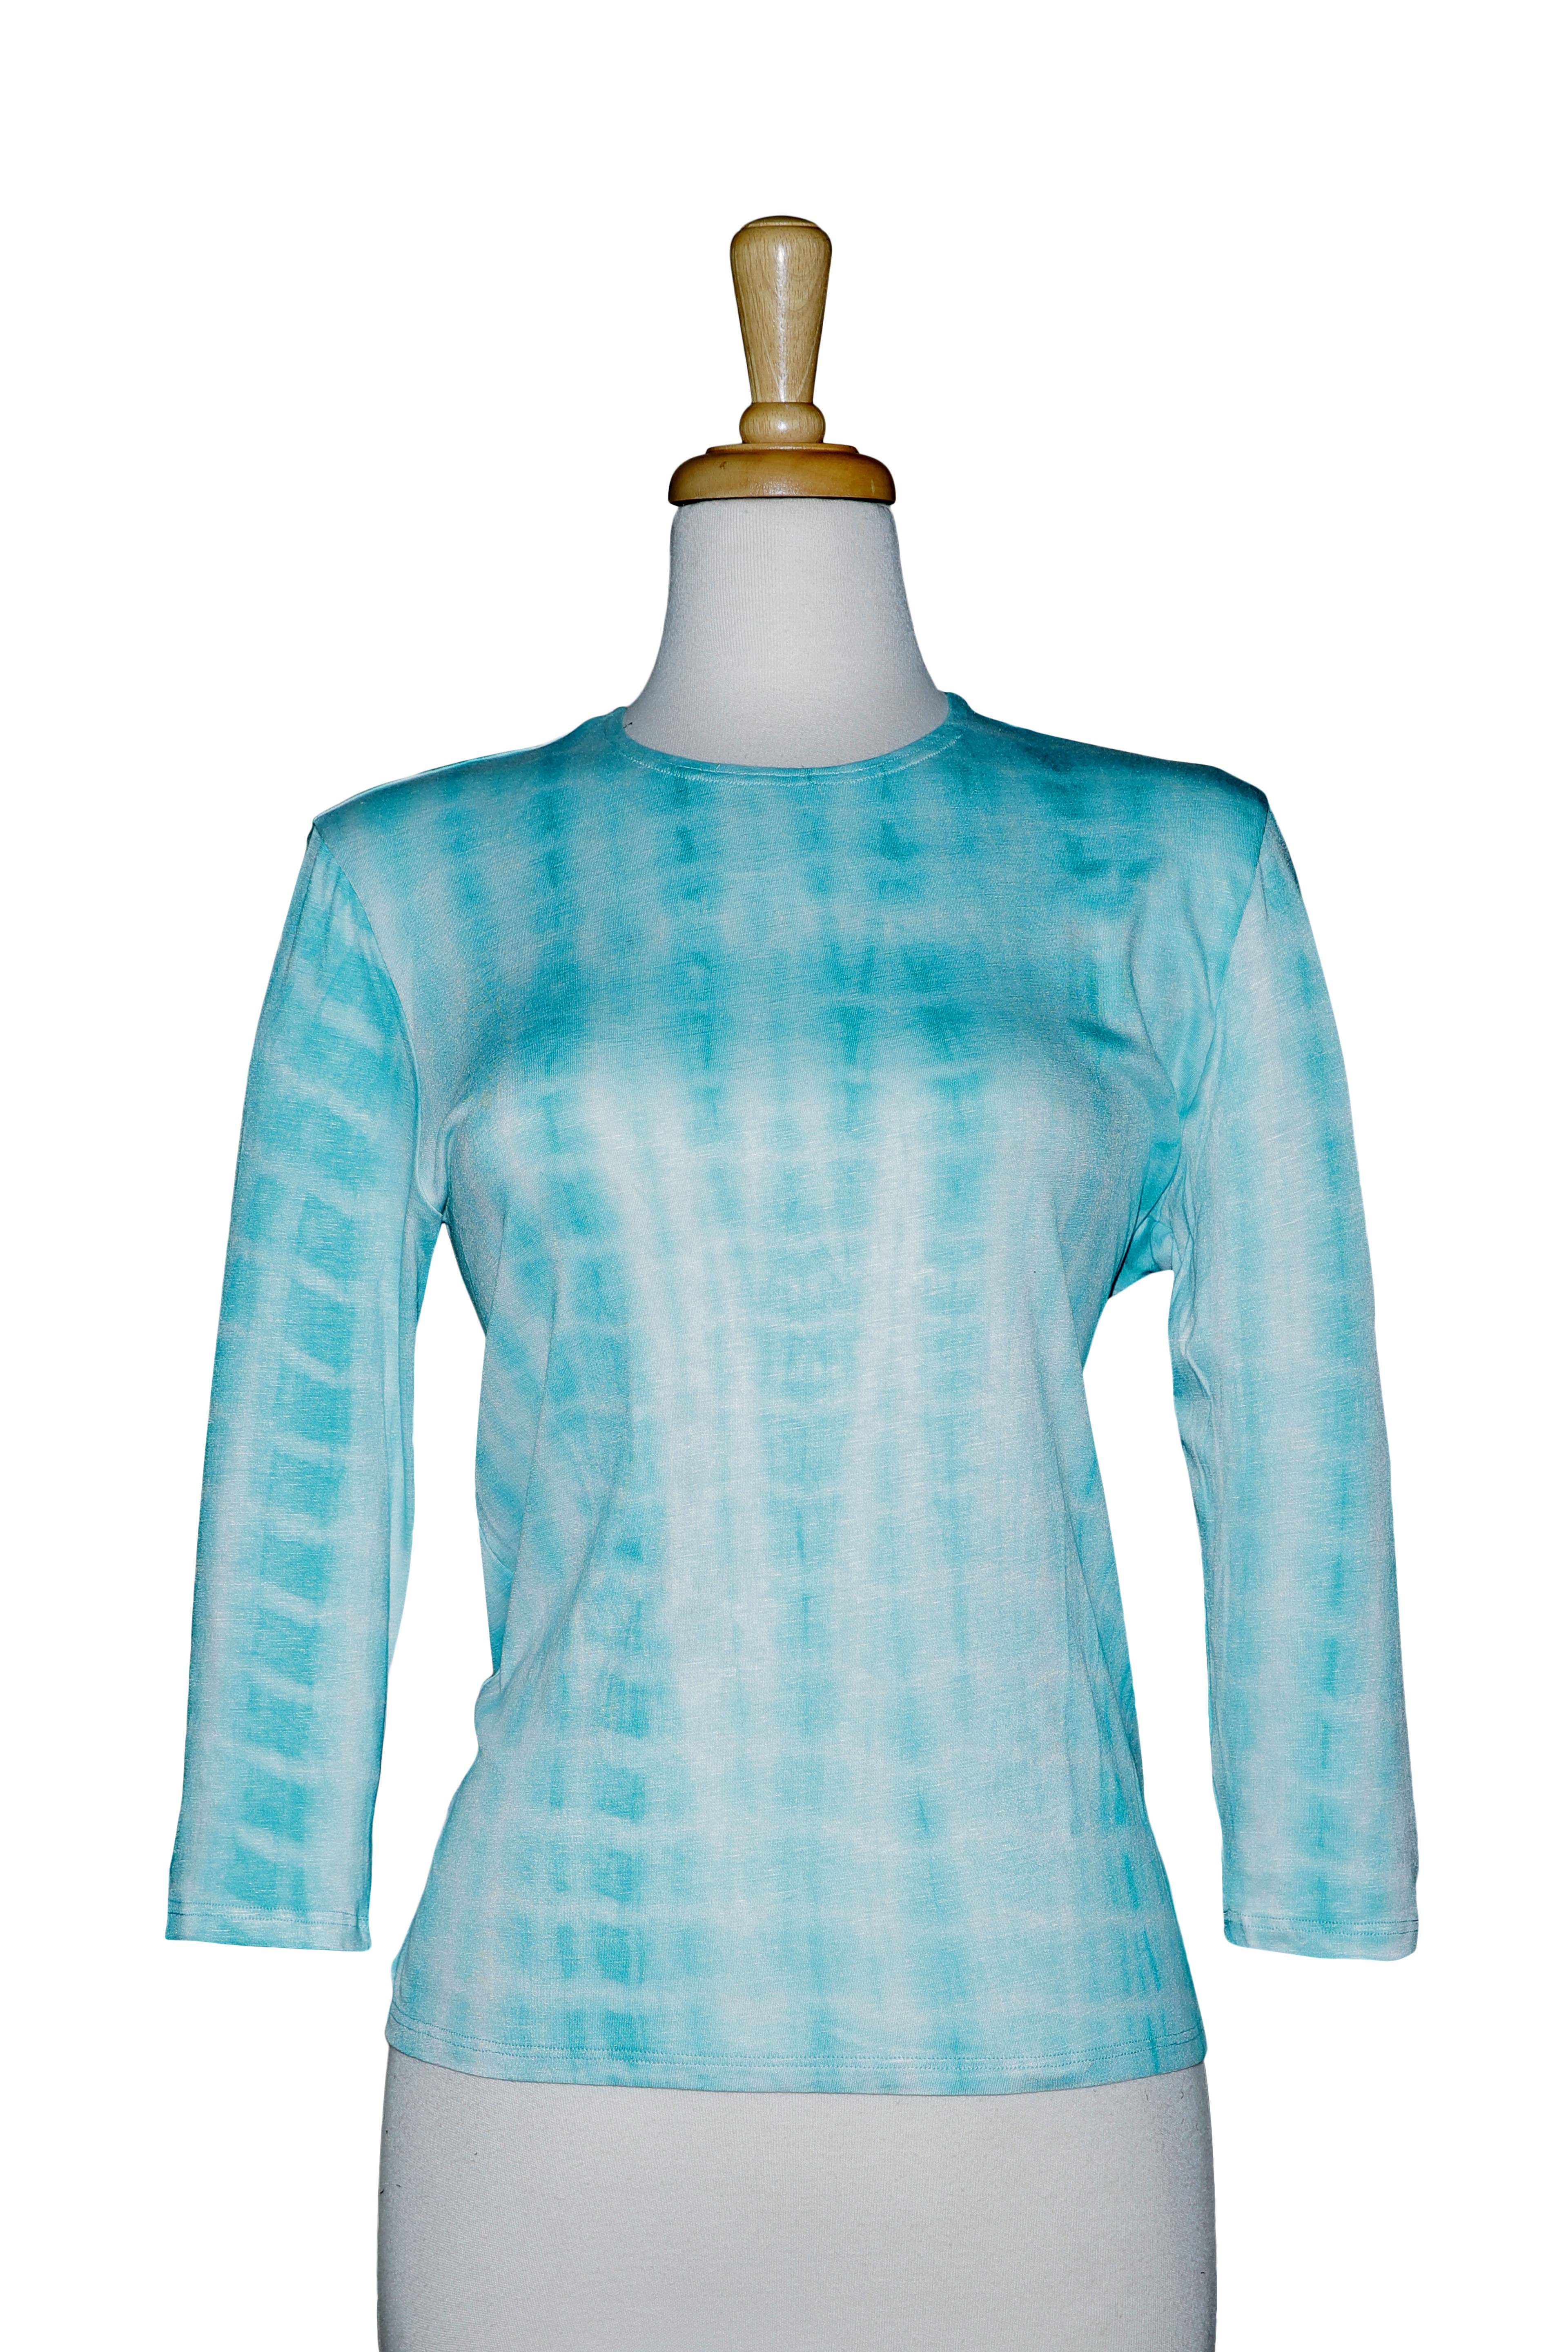 Plus Size Soft Teal Tie Dye 3/4 Sleeve  Cotton Top 